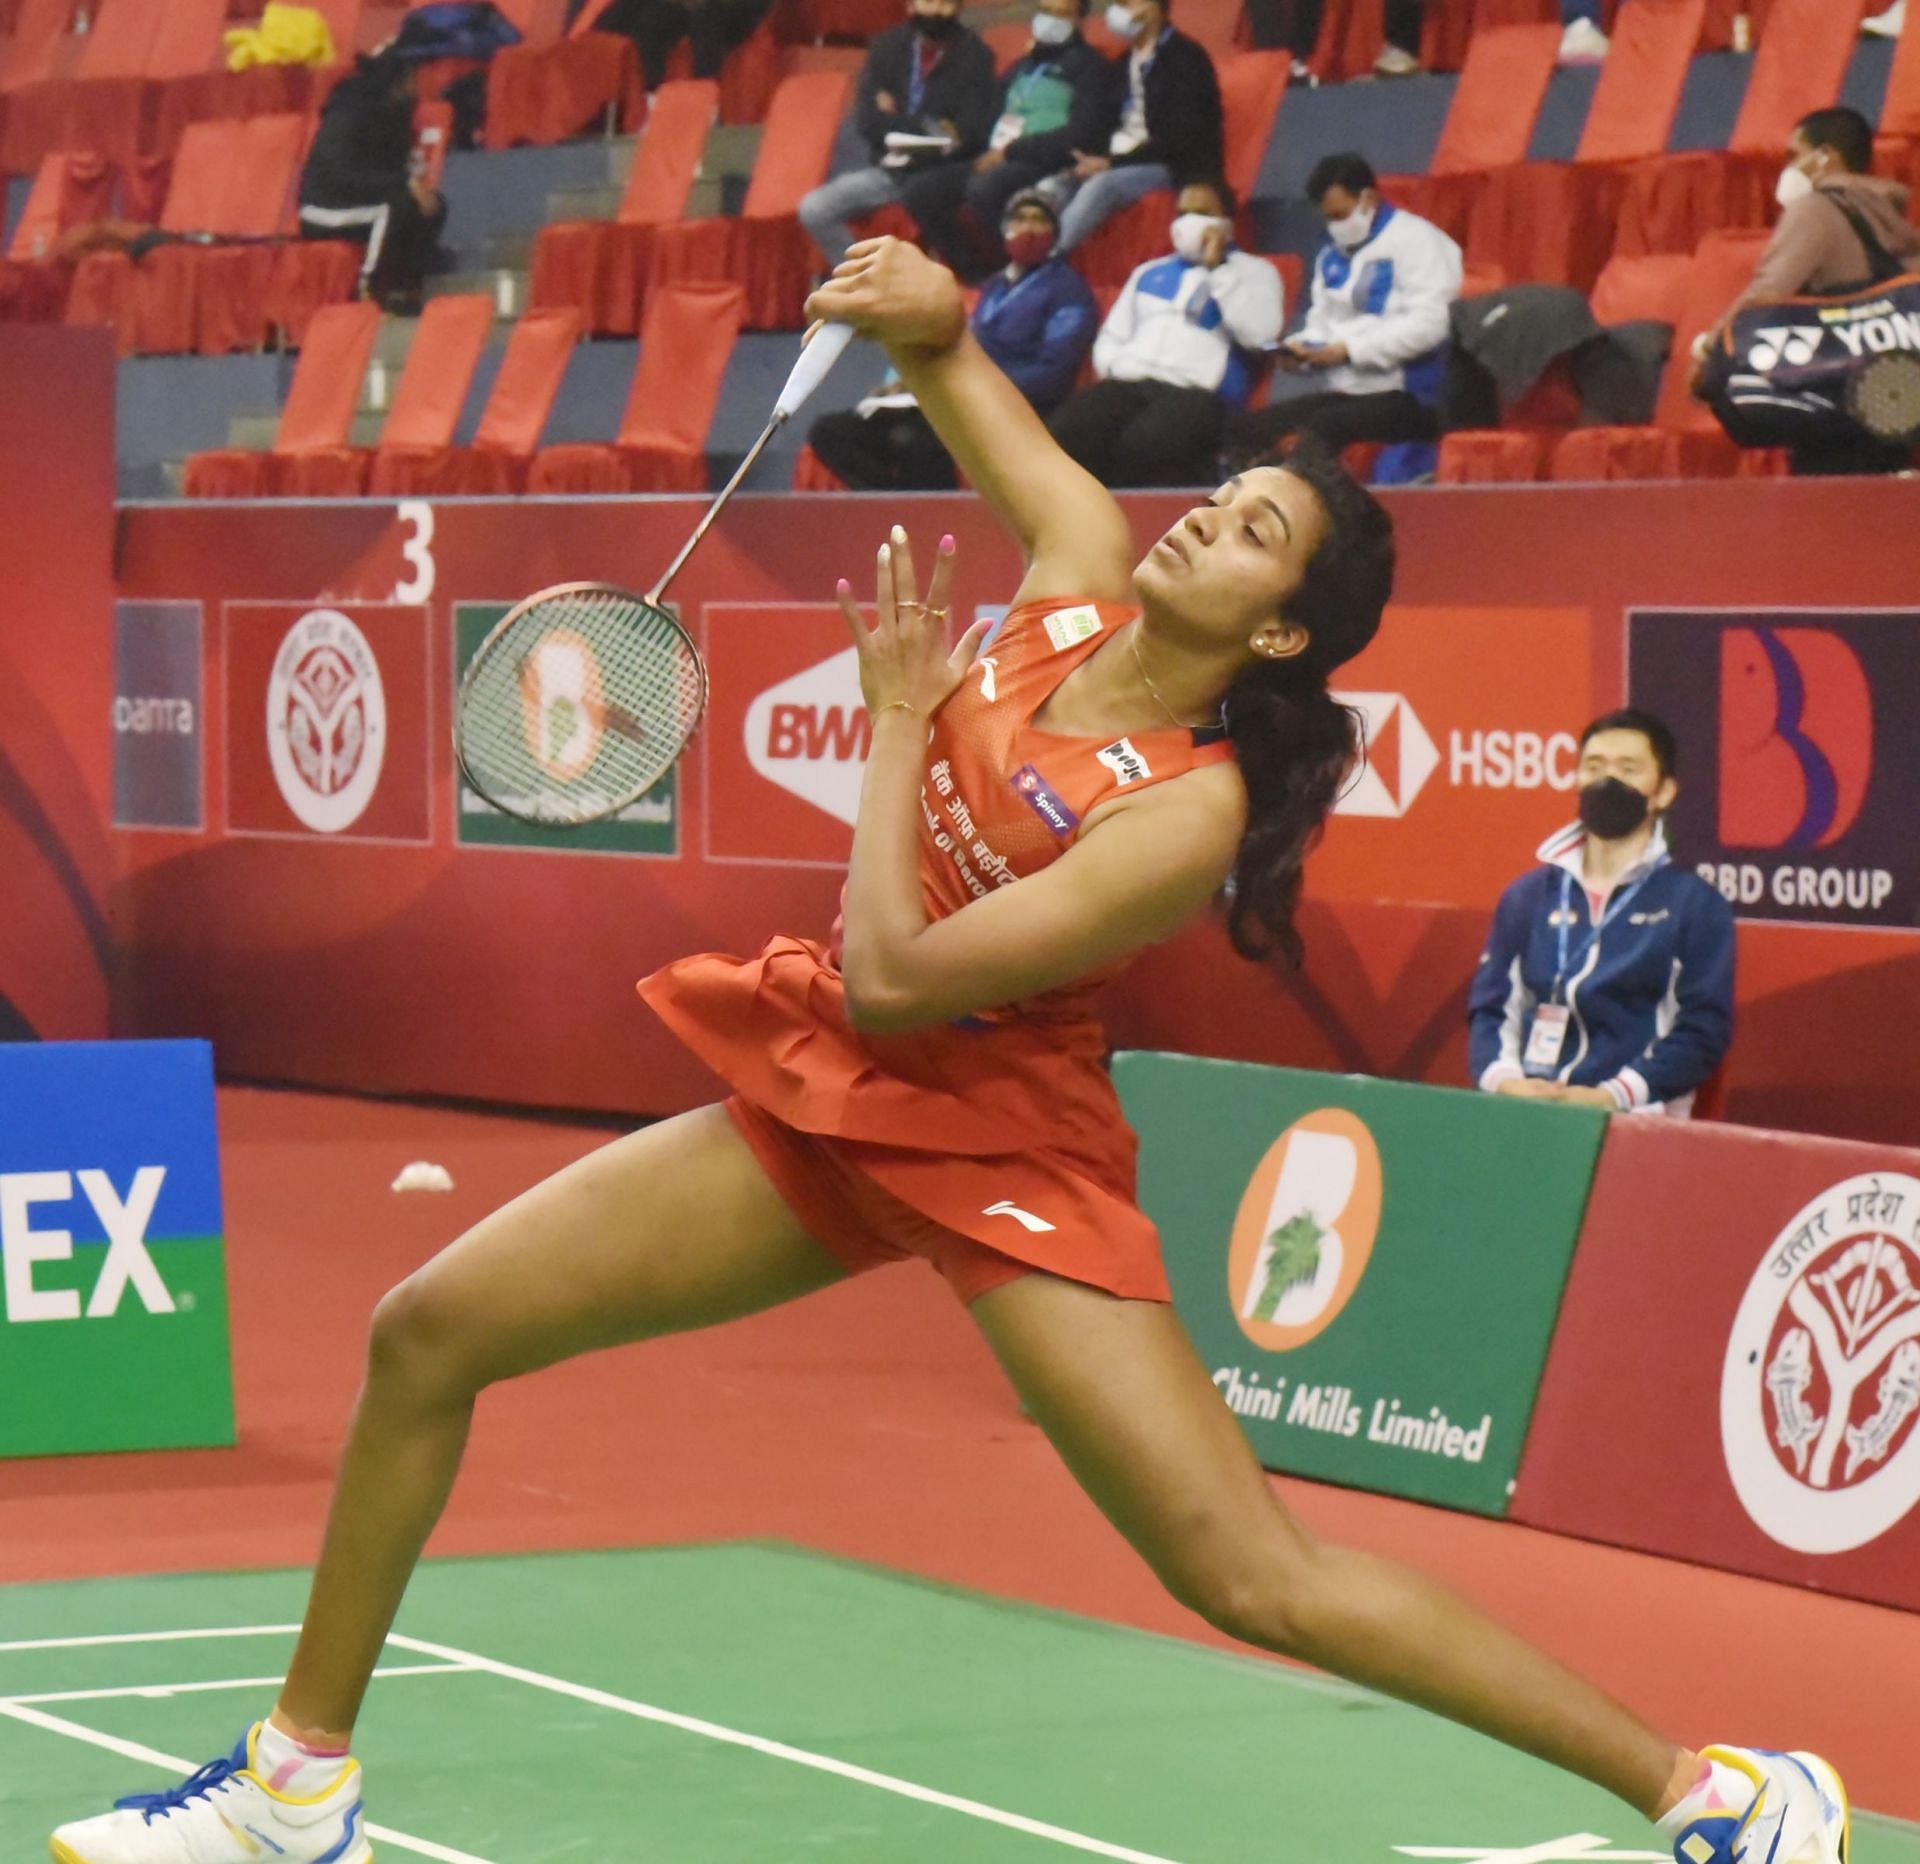 Top seed PV Sindhu entered the final after Evgeniya Kosetskaya of Russia retired in the women&rsquo;s singles semifinal in Lucknow (Picture: BAI)